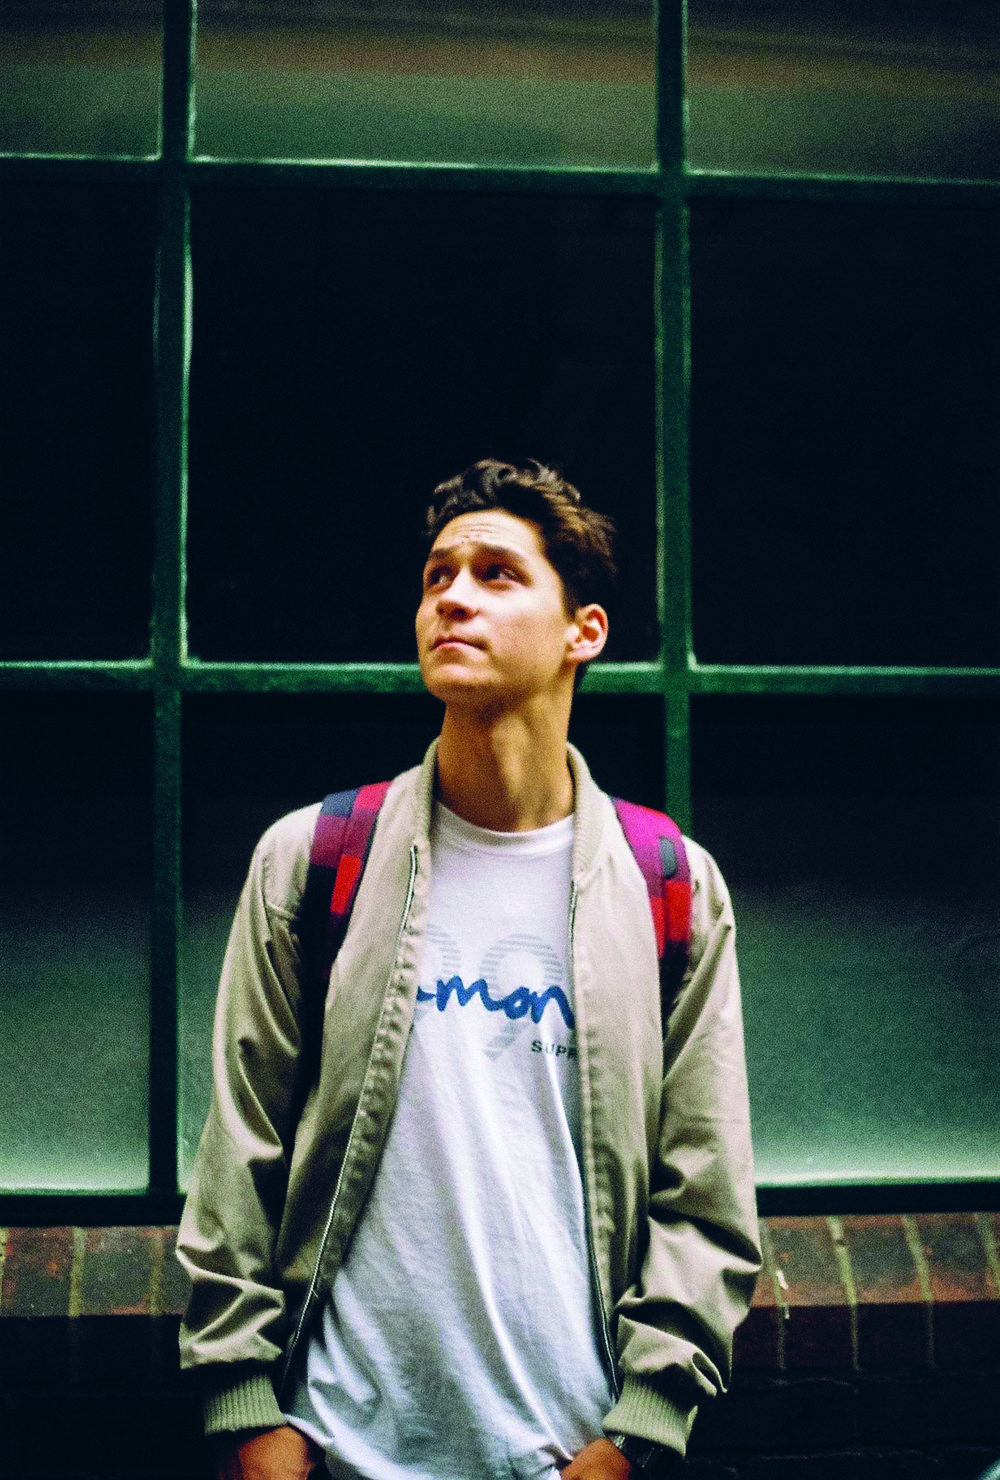  DIMITRIOS: This hip-hop artist produces a refreshing and forward-thinking blend of variable and eclectic sounds.     